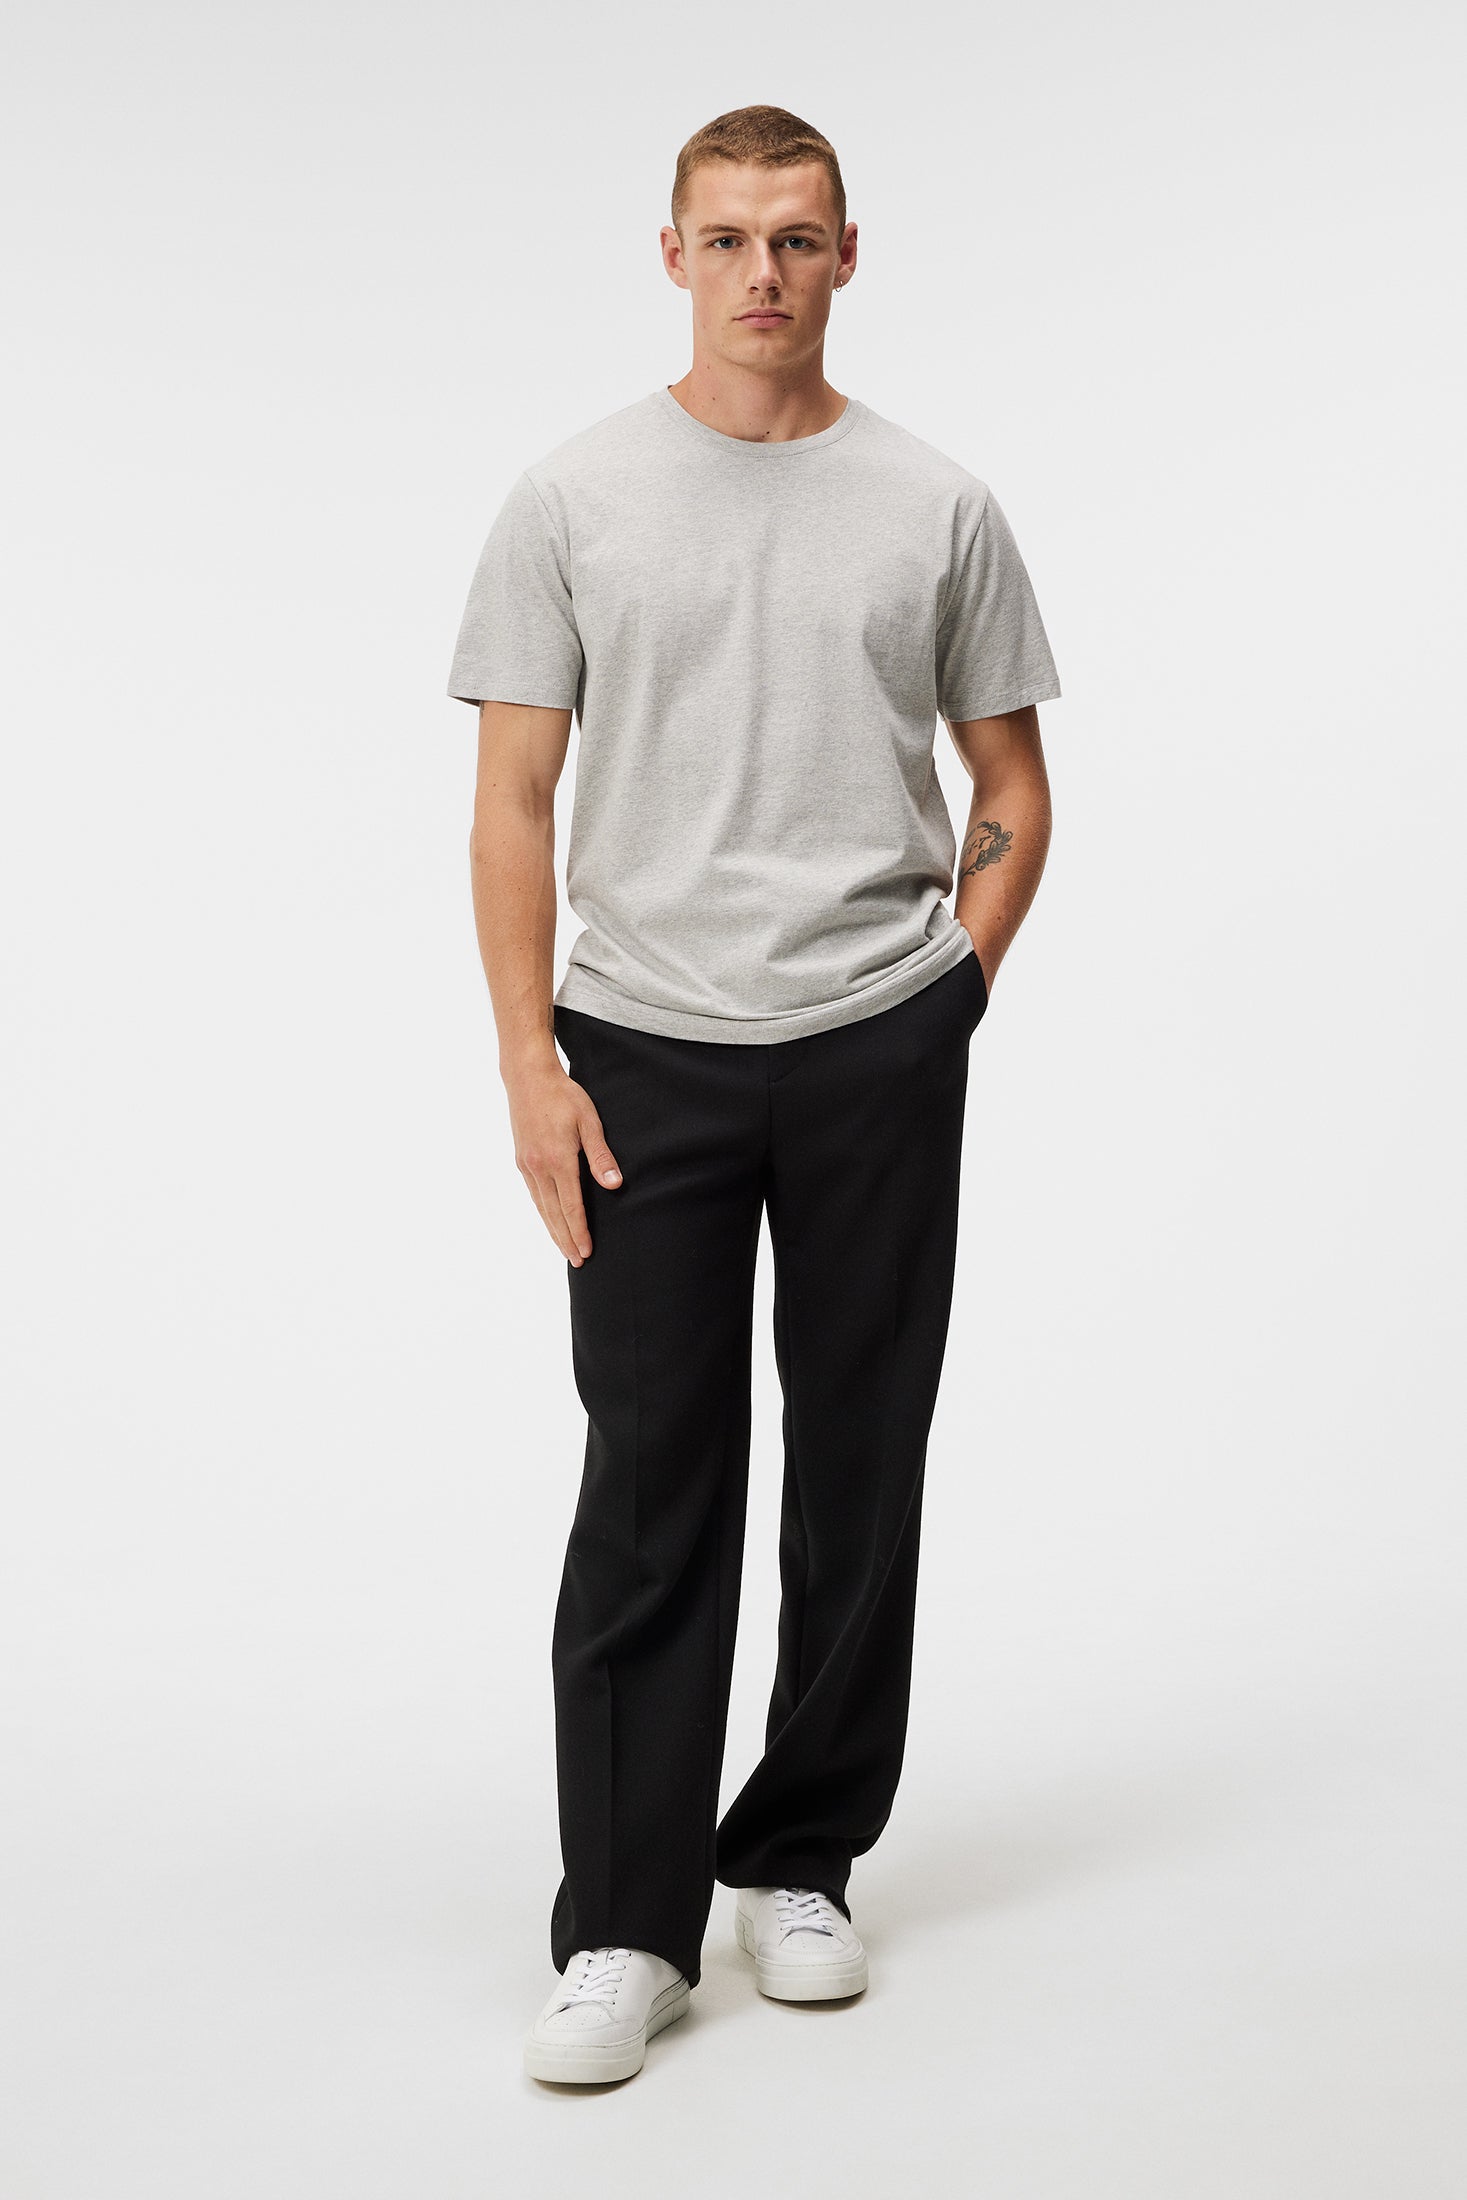 Buy WES Formals Solid Grey Slim Tapered Fit Trousers from Westside